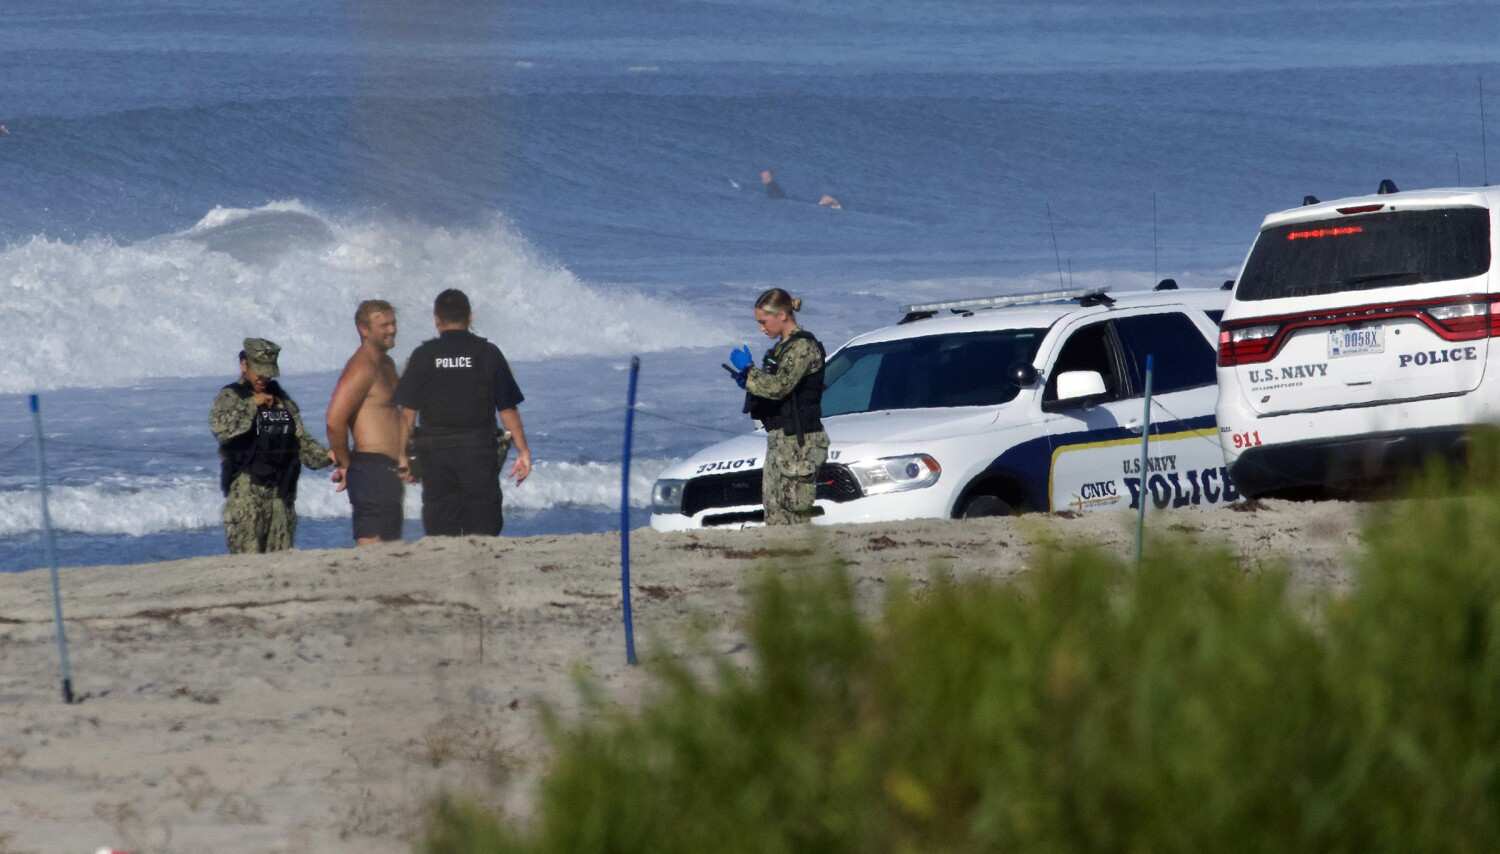 Surfers chase storm swells onto Coronado Navy base, landing two trespassers in handcuffs